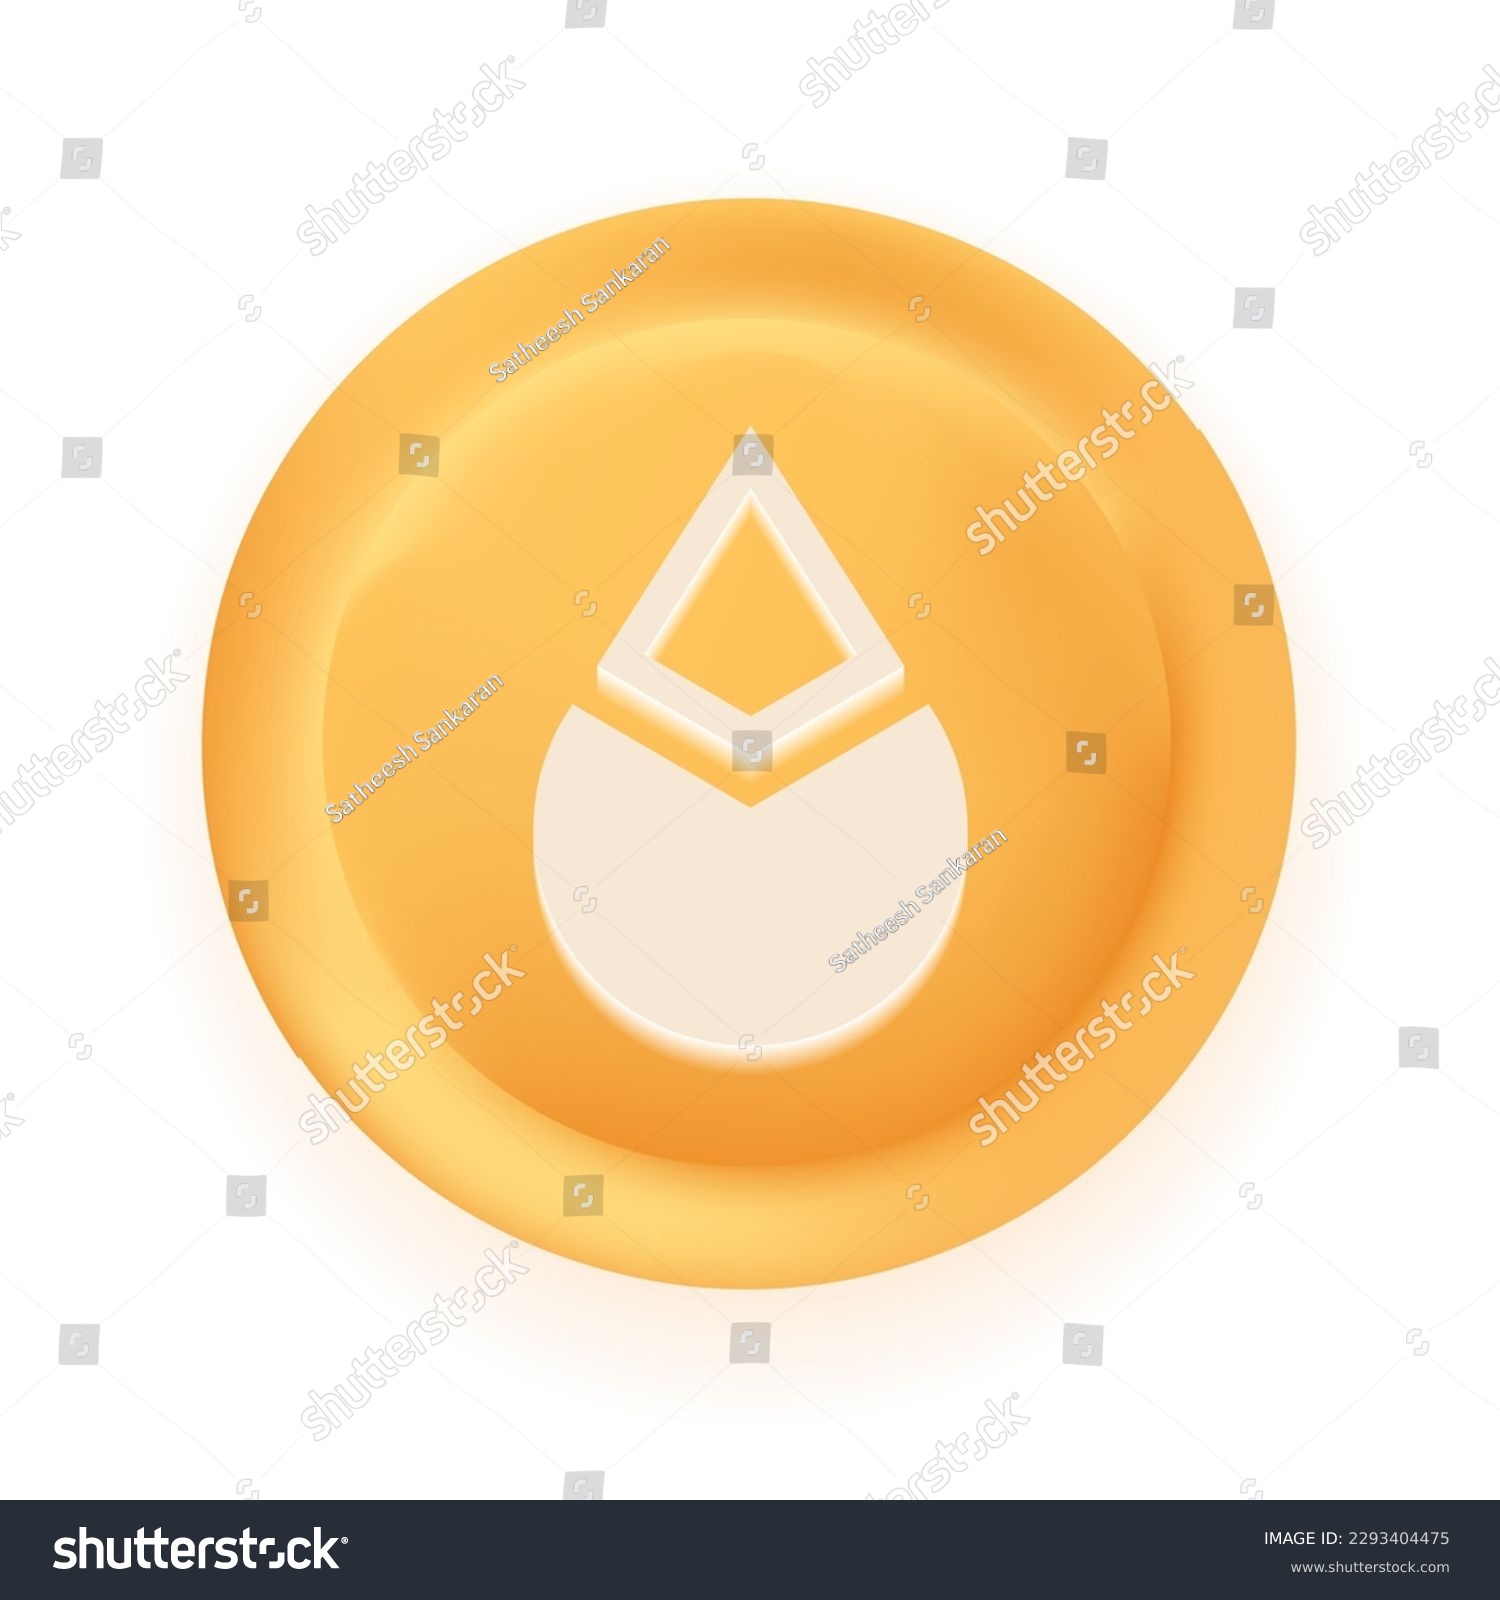 SVG of Lido DAO (LDO) crypto currency 3D coin vector illustration isolated on white background. Can be used as virtual money icon, logo, emblem, sticker and badge designs. svg